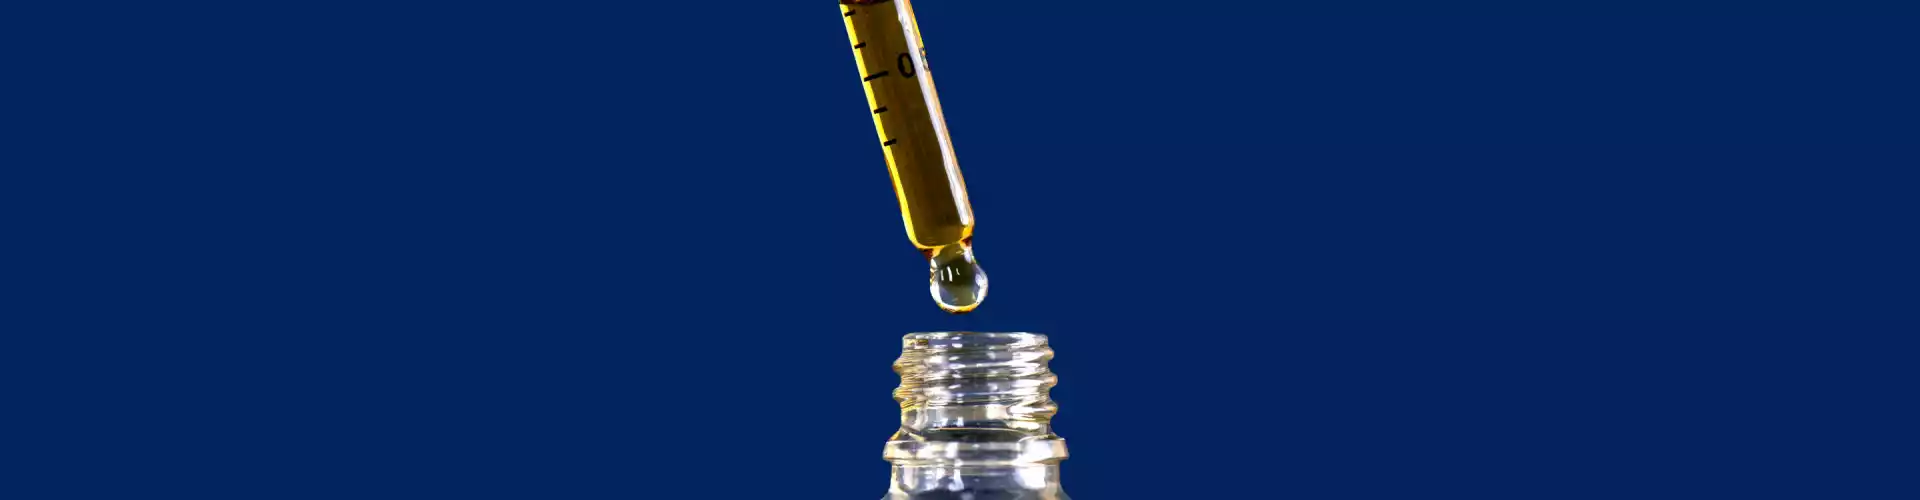 CBD Oil - An Introduction (Everything You Wanted to Know)